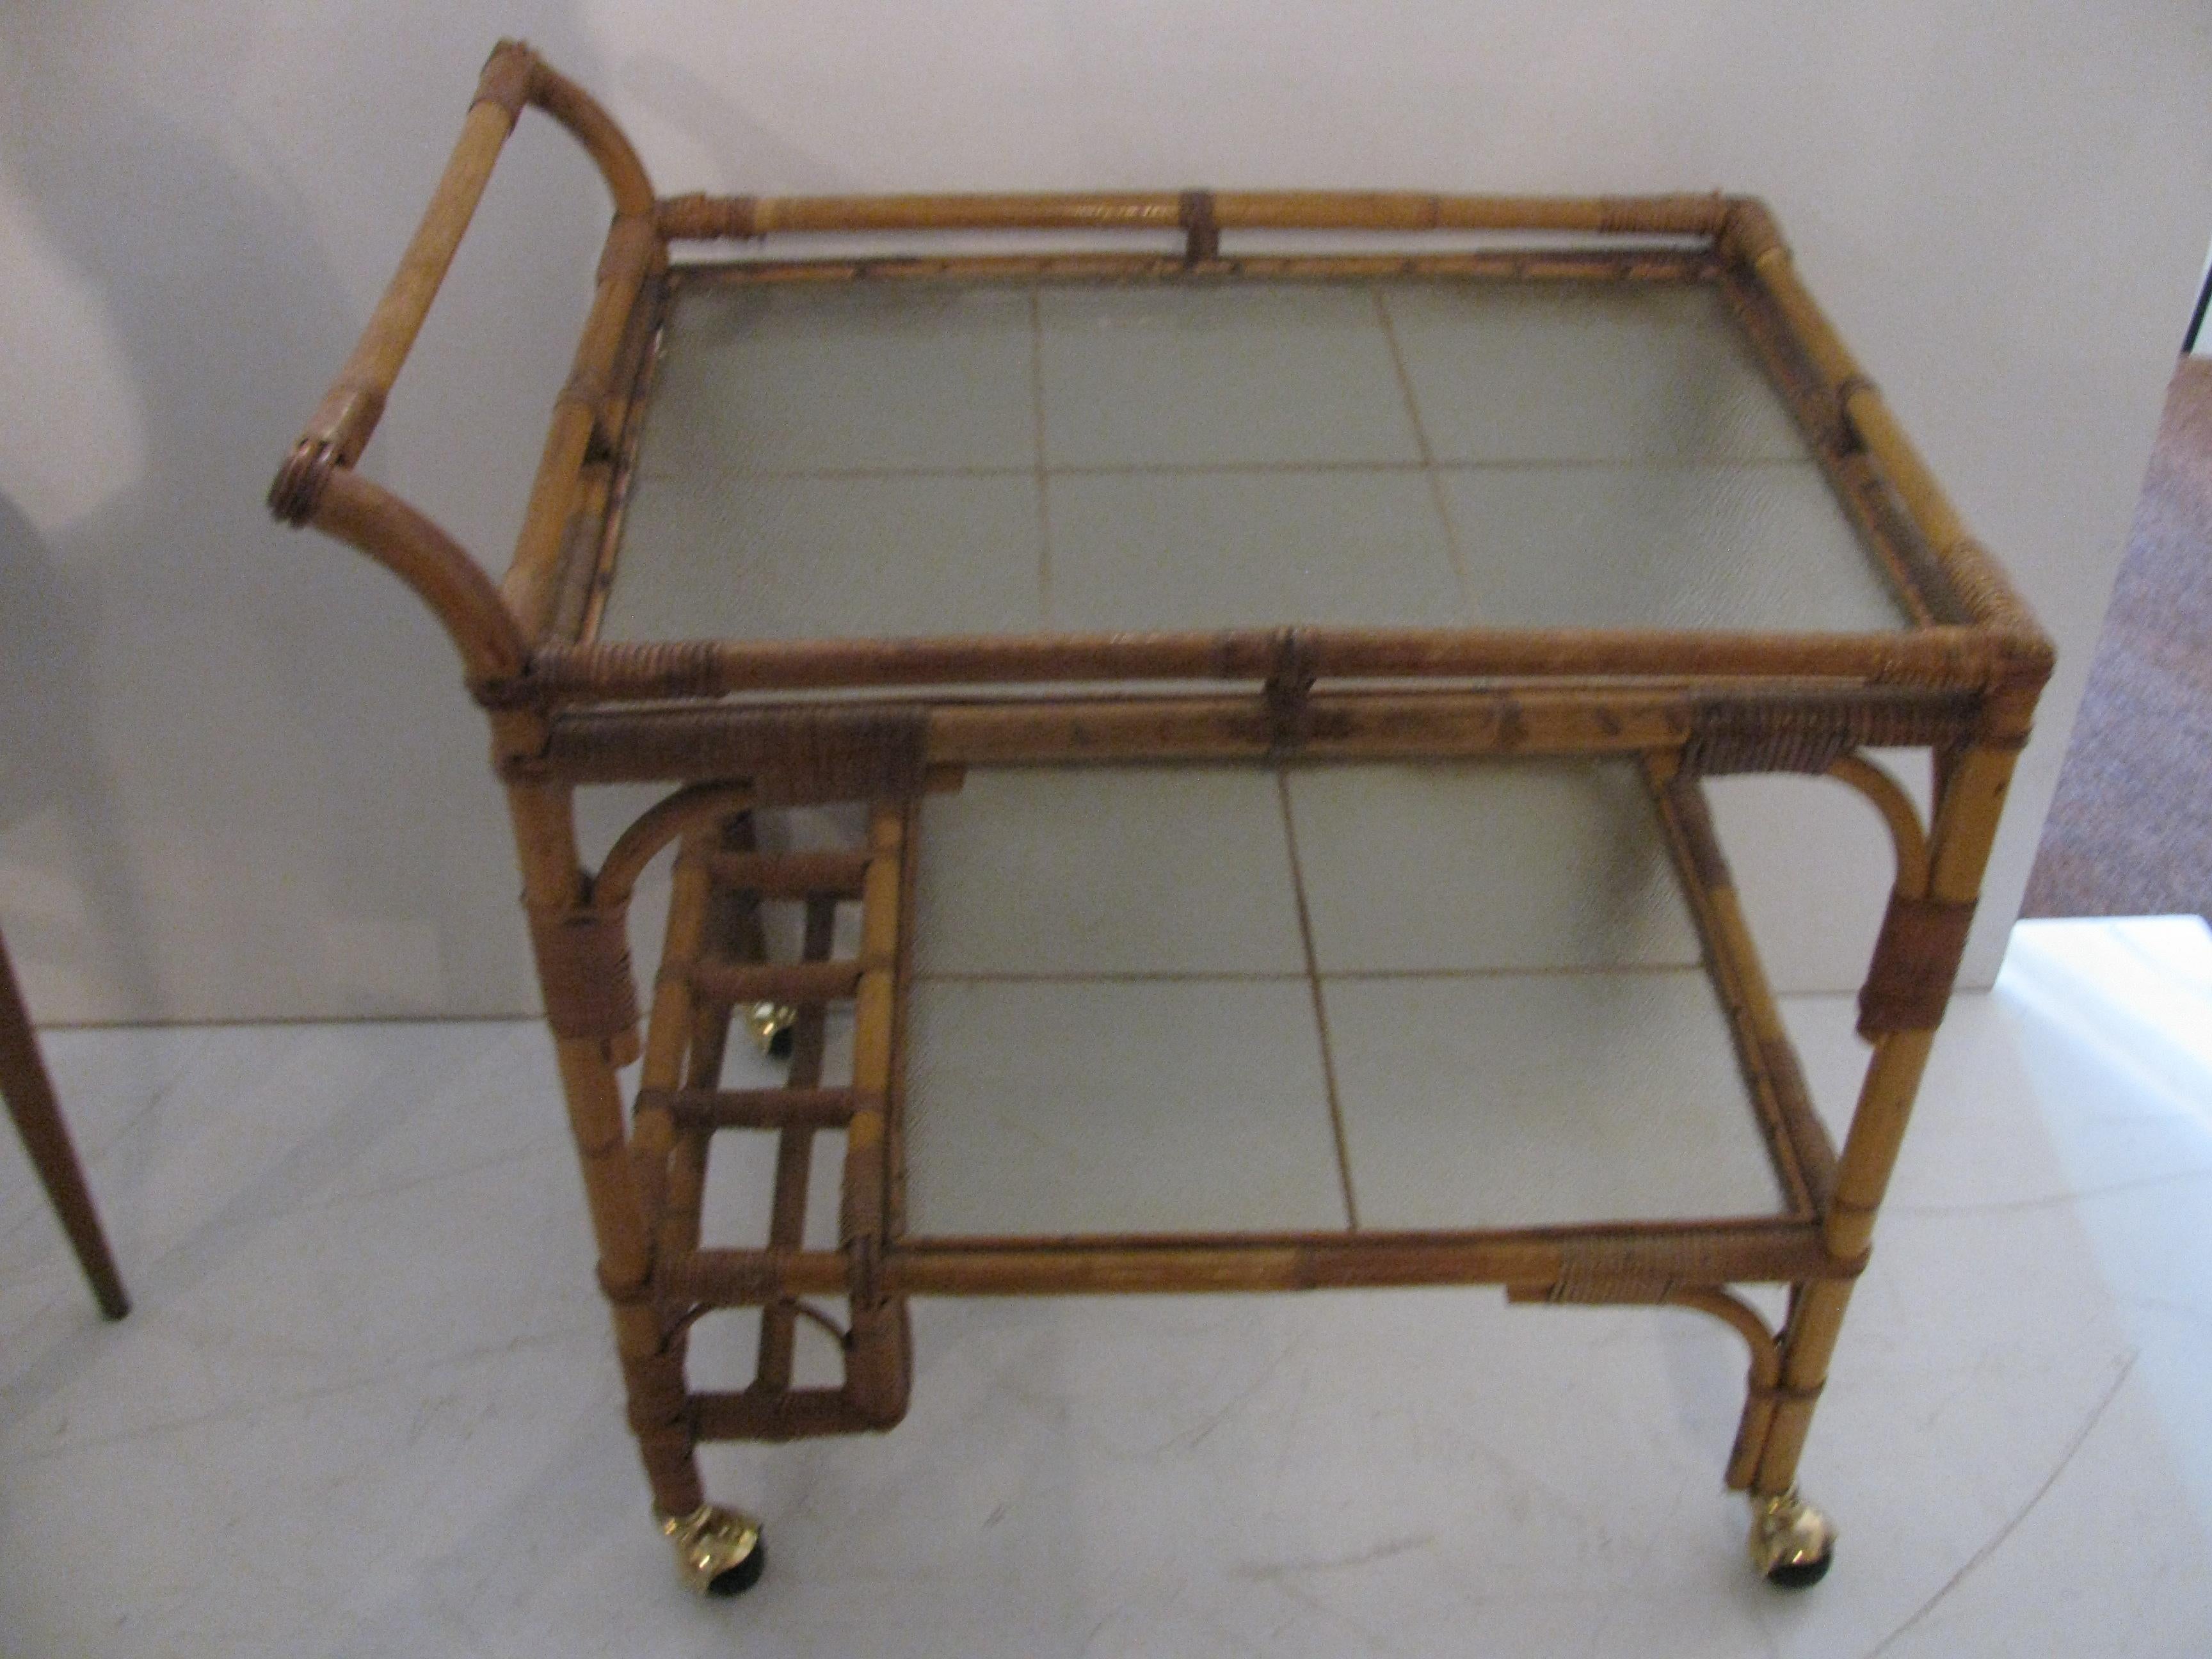 Rattan bar cart with frosted glass shelves. Bottle holder at the base on lower shelf. Measures: Shelf is 17 x 23.5in.